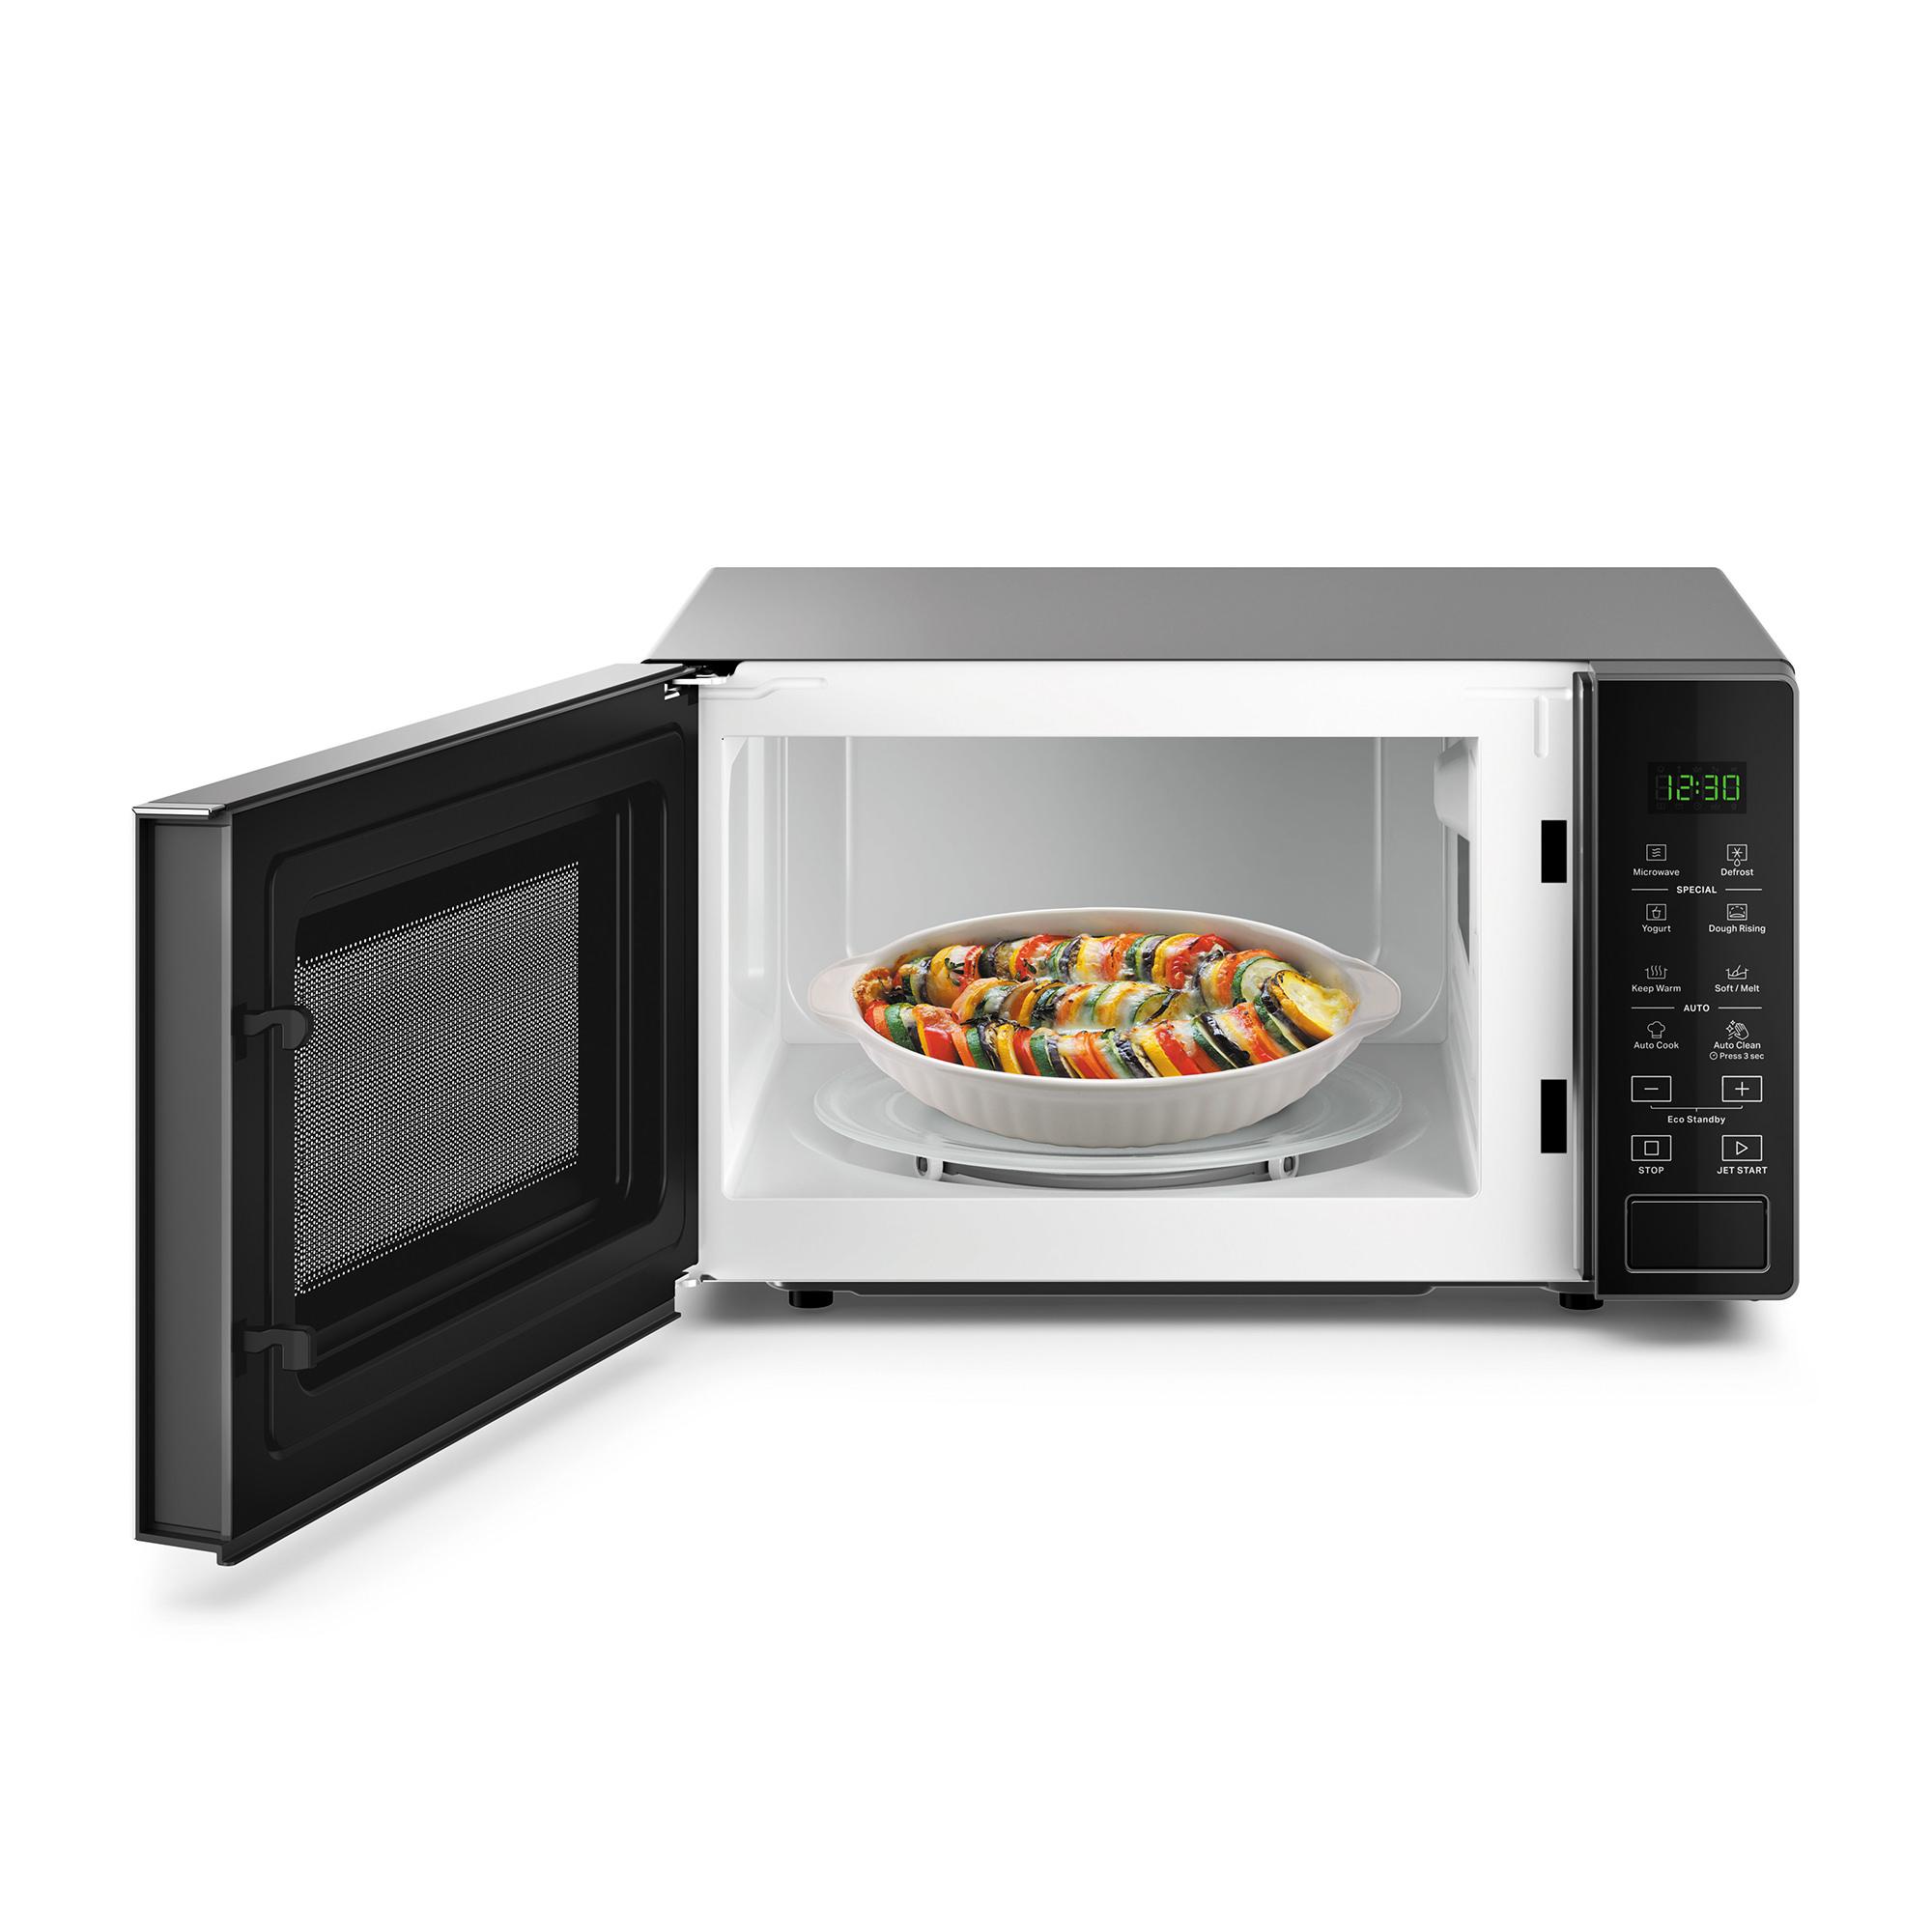 Whirlpool Microwave Oven 20L Black Image 4